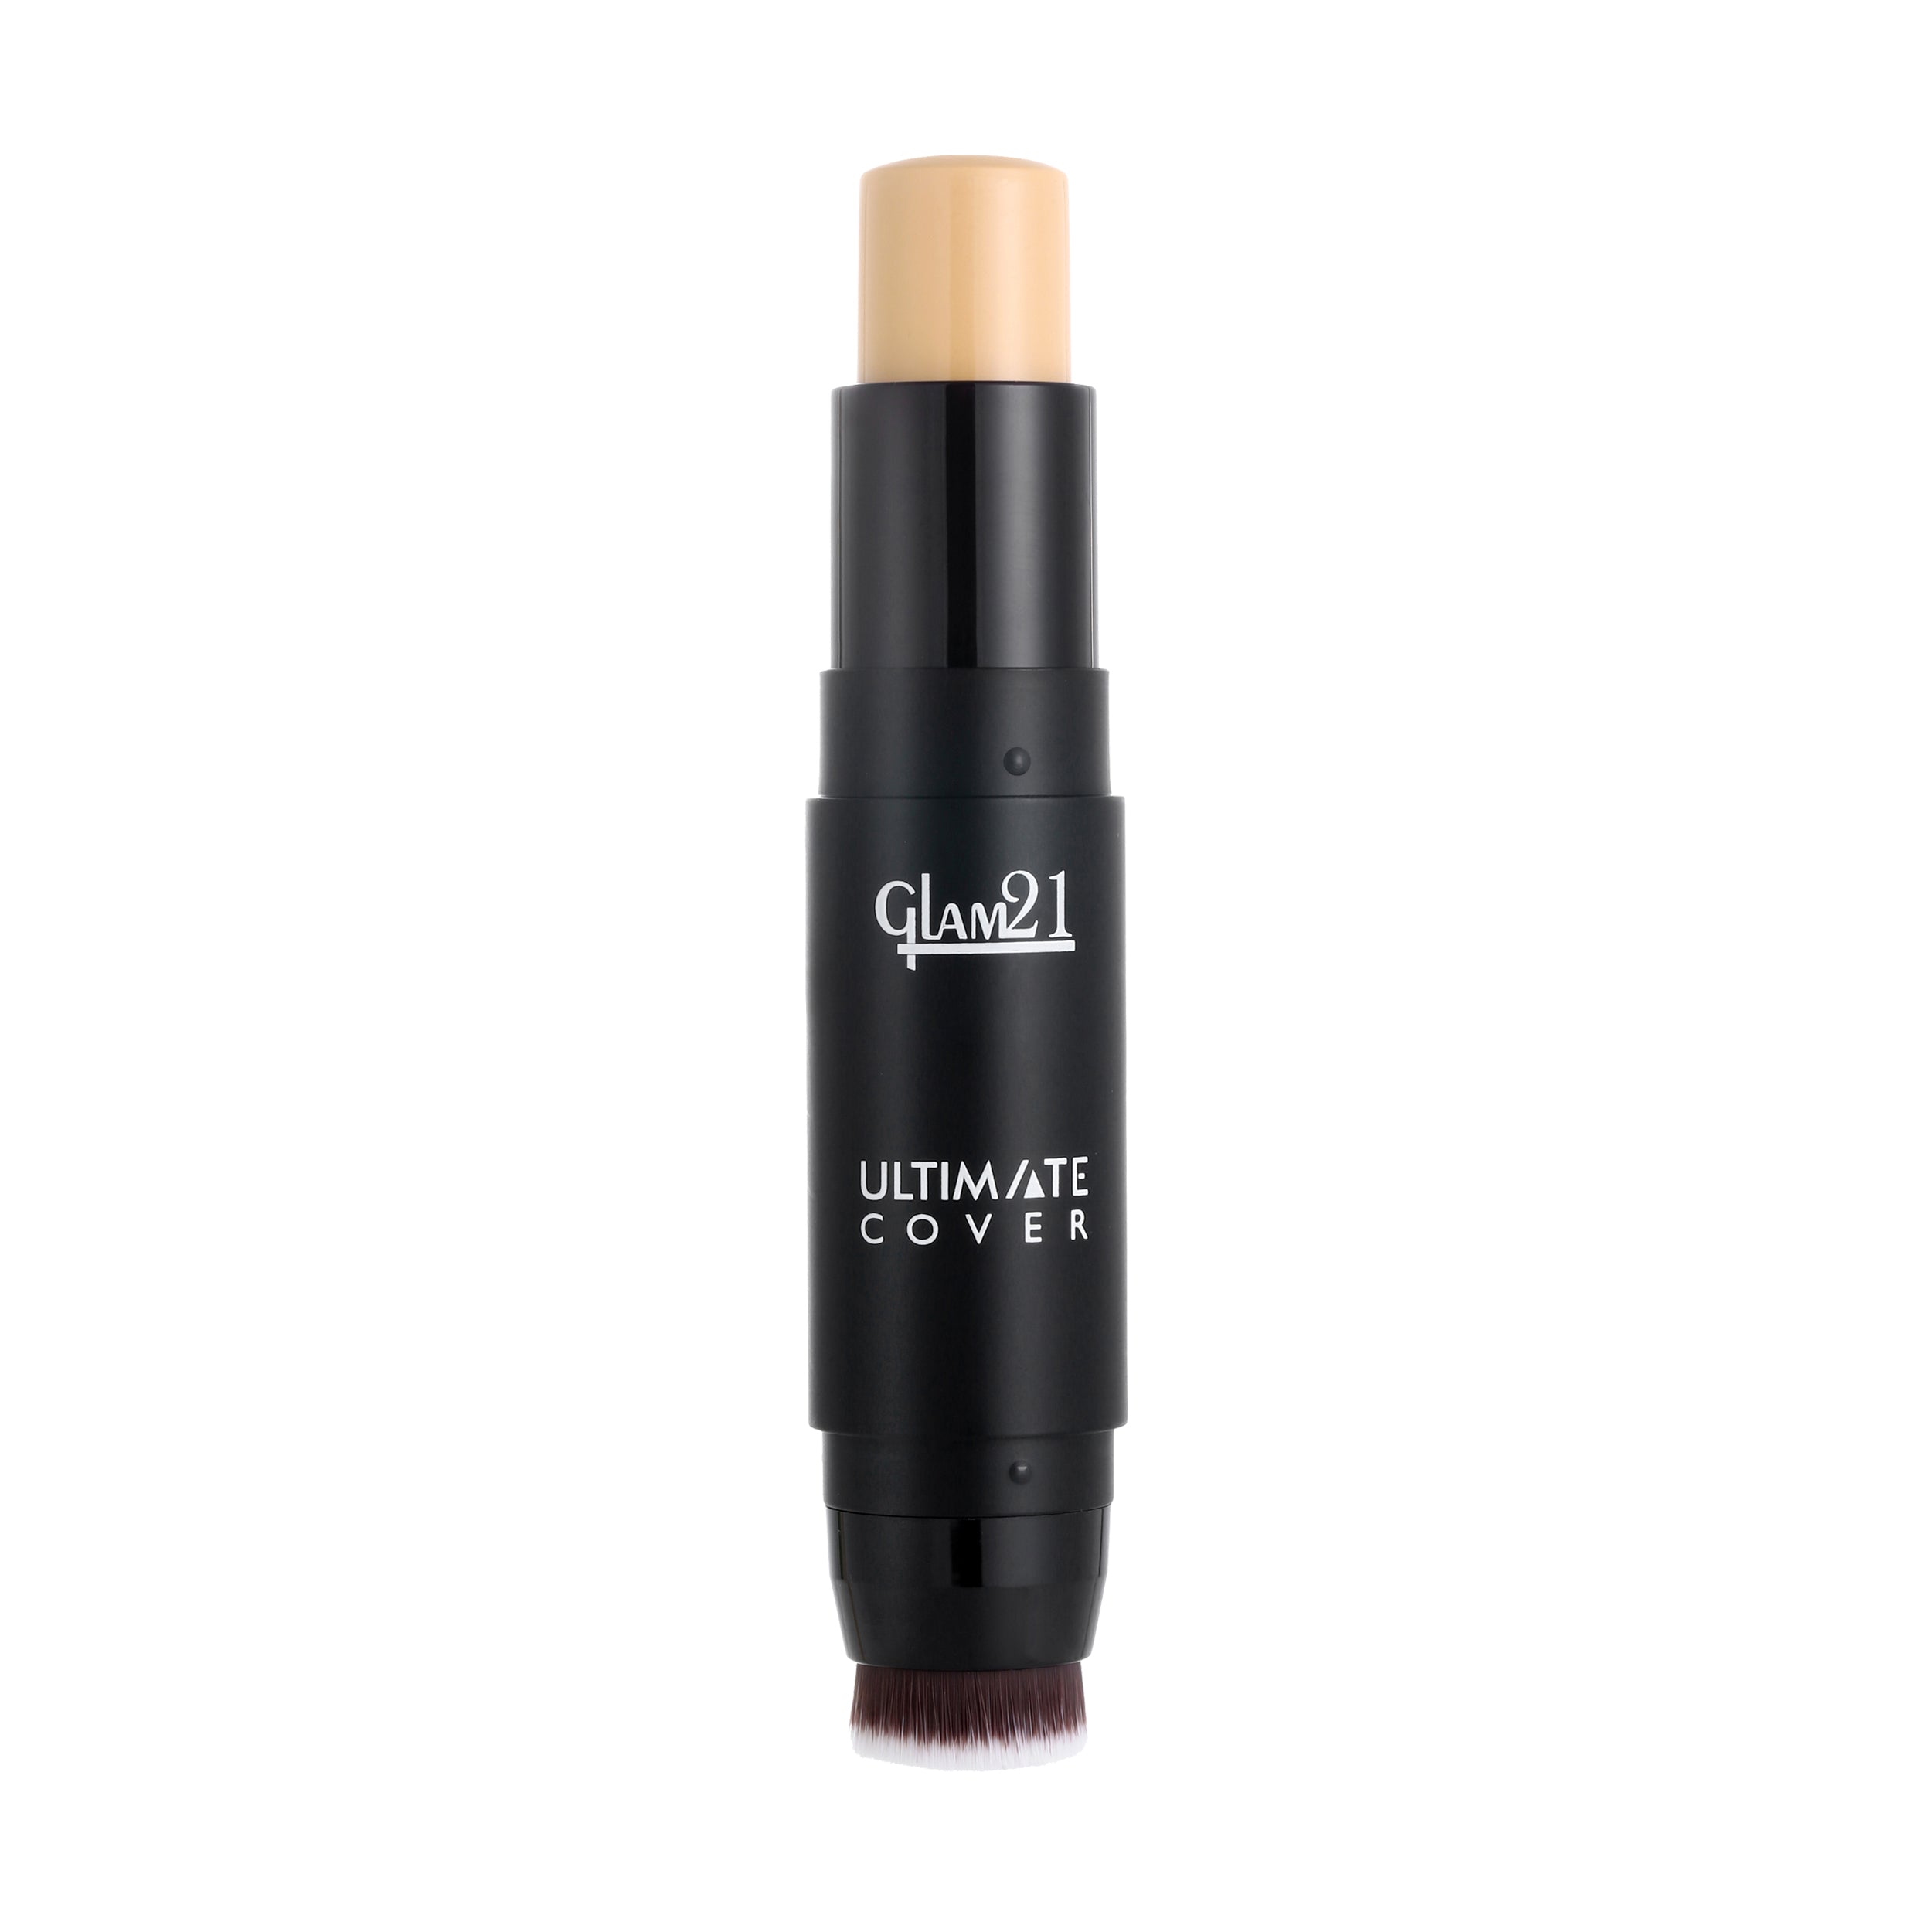 Glam21 Ultimate Cover Foundation Stick Easy to Blend & Gives Matte Finish upto 12 Hours Foundation (06-Truffle, 8 g)